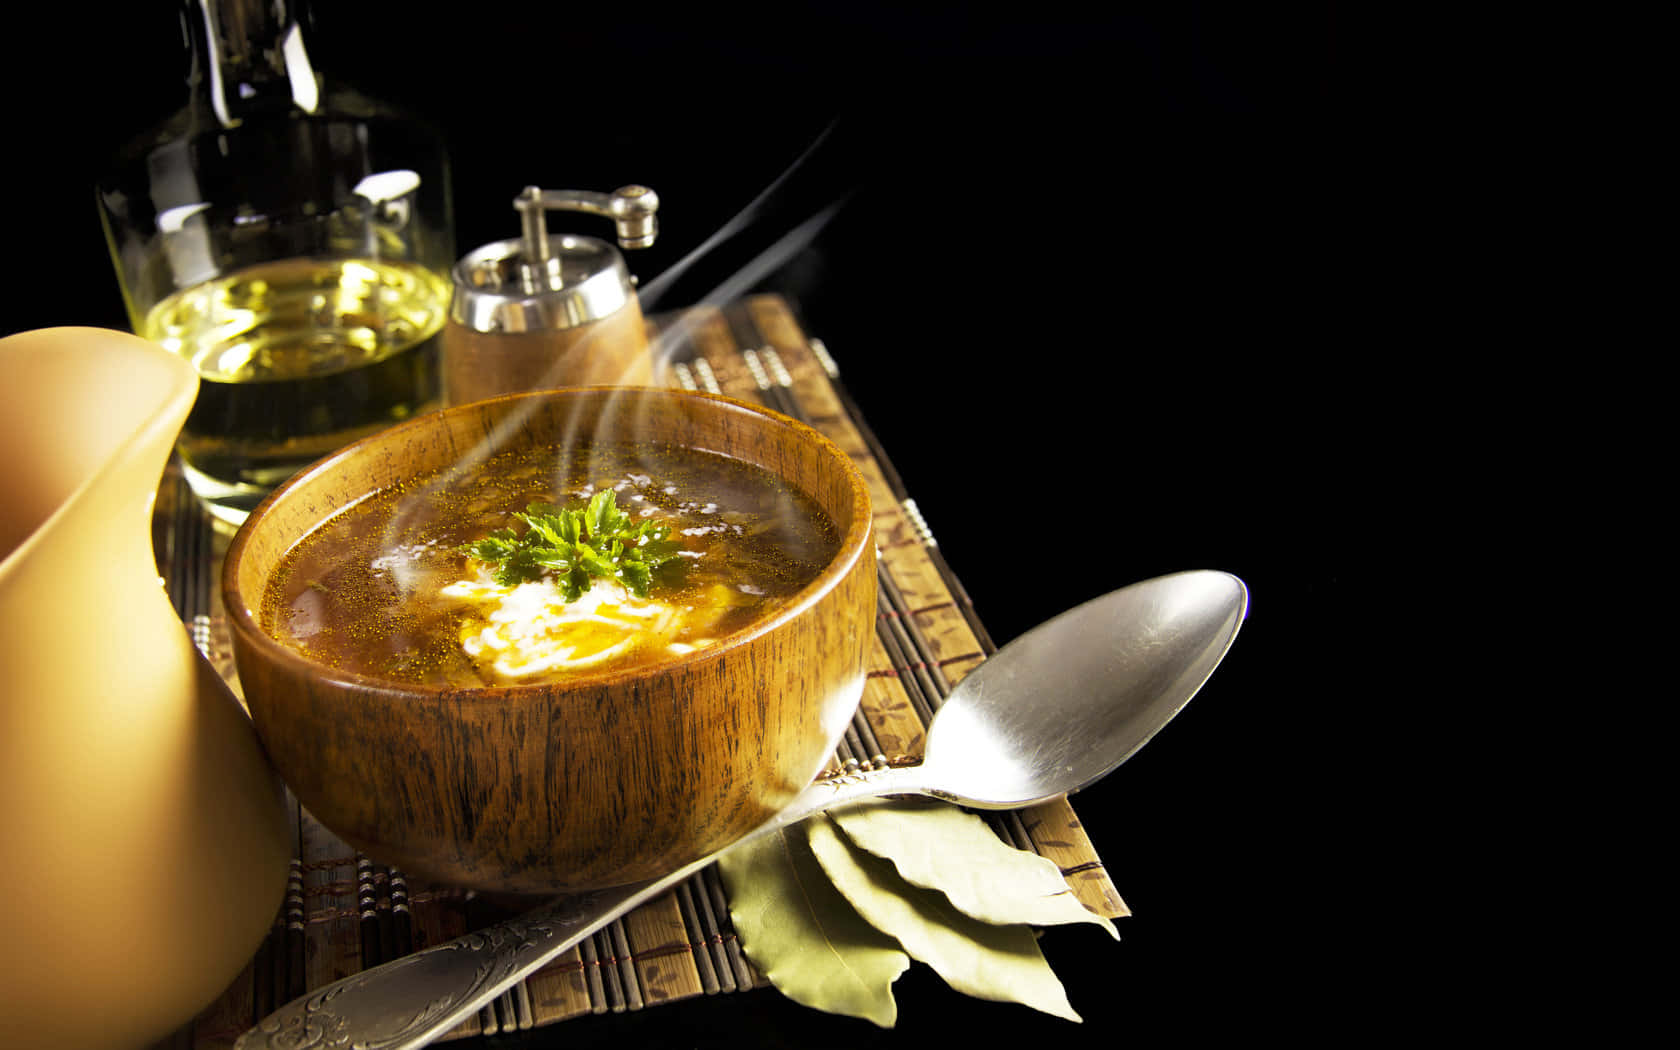 Enjoy a warm and comforting bowl of soup.